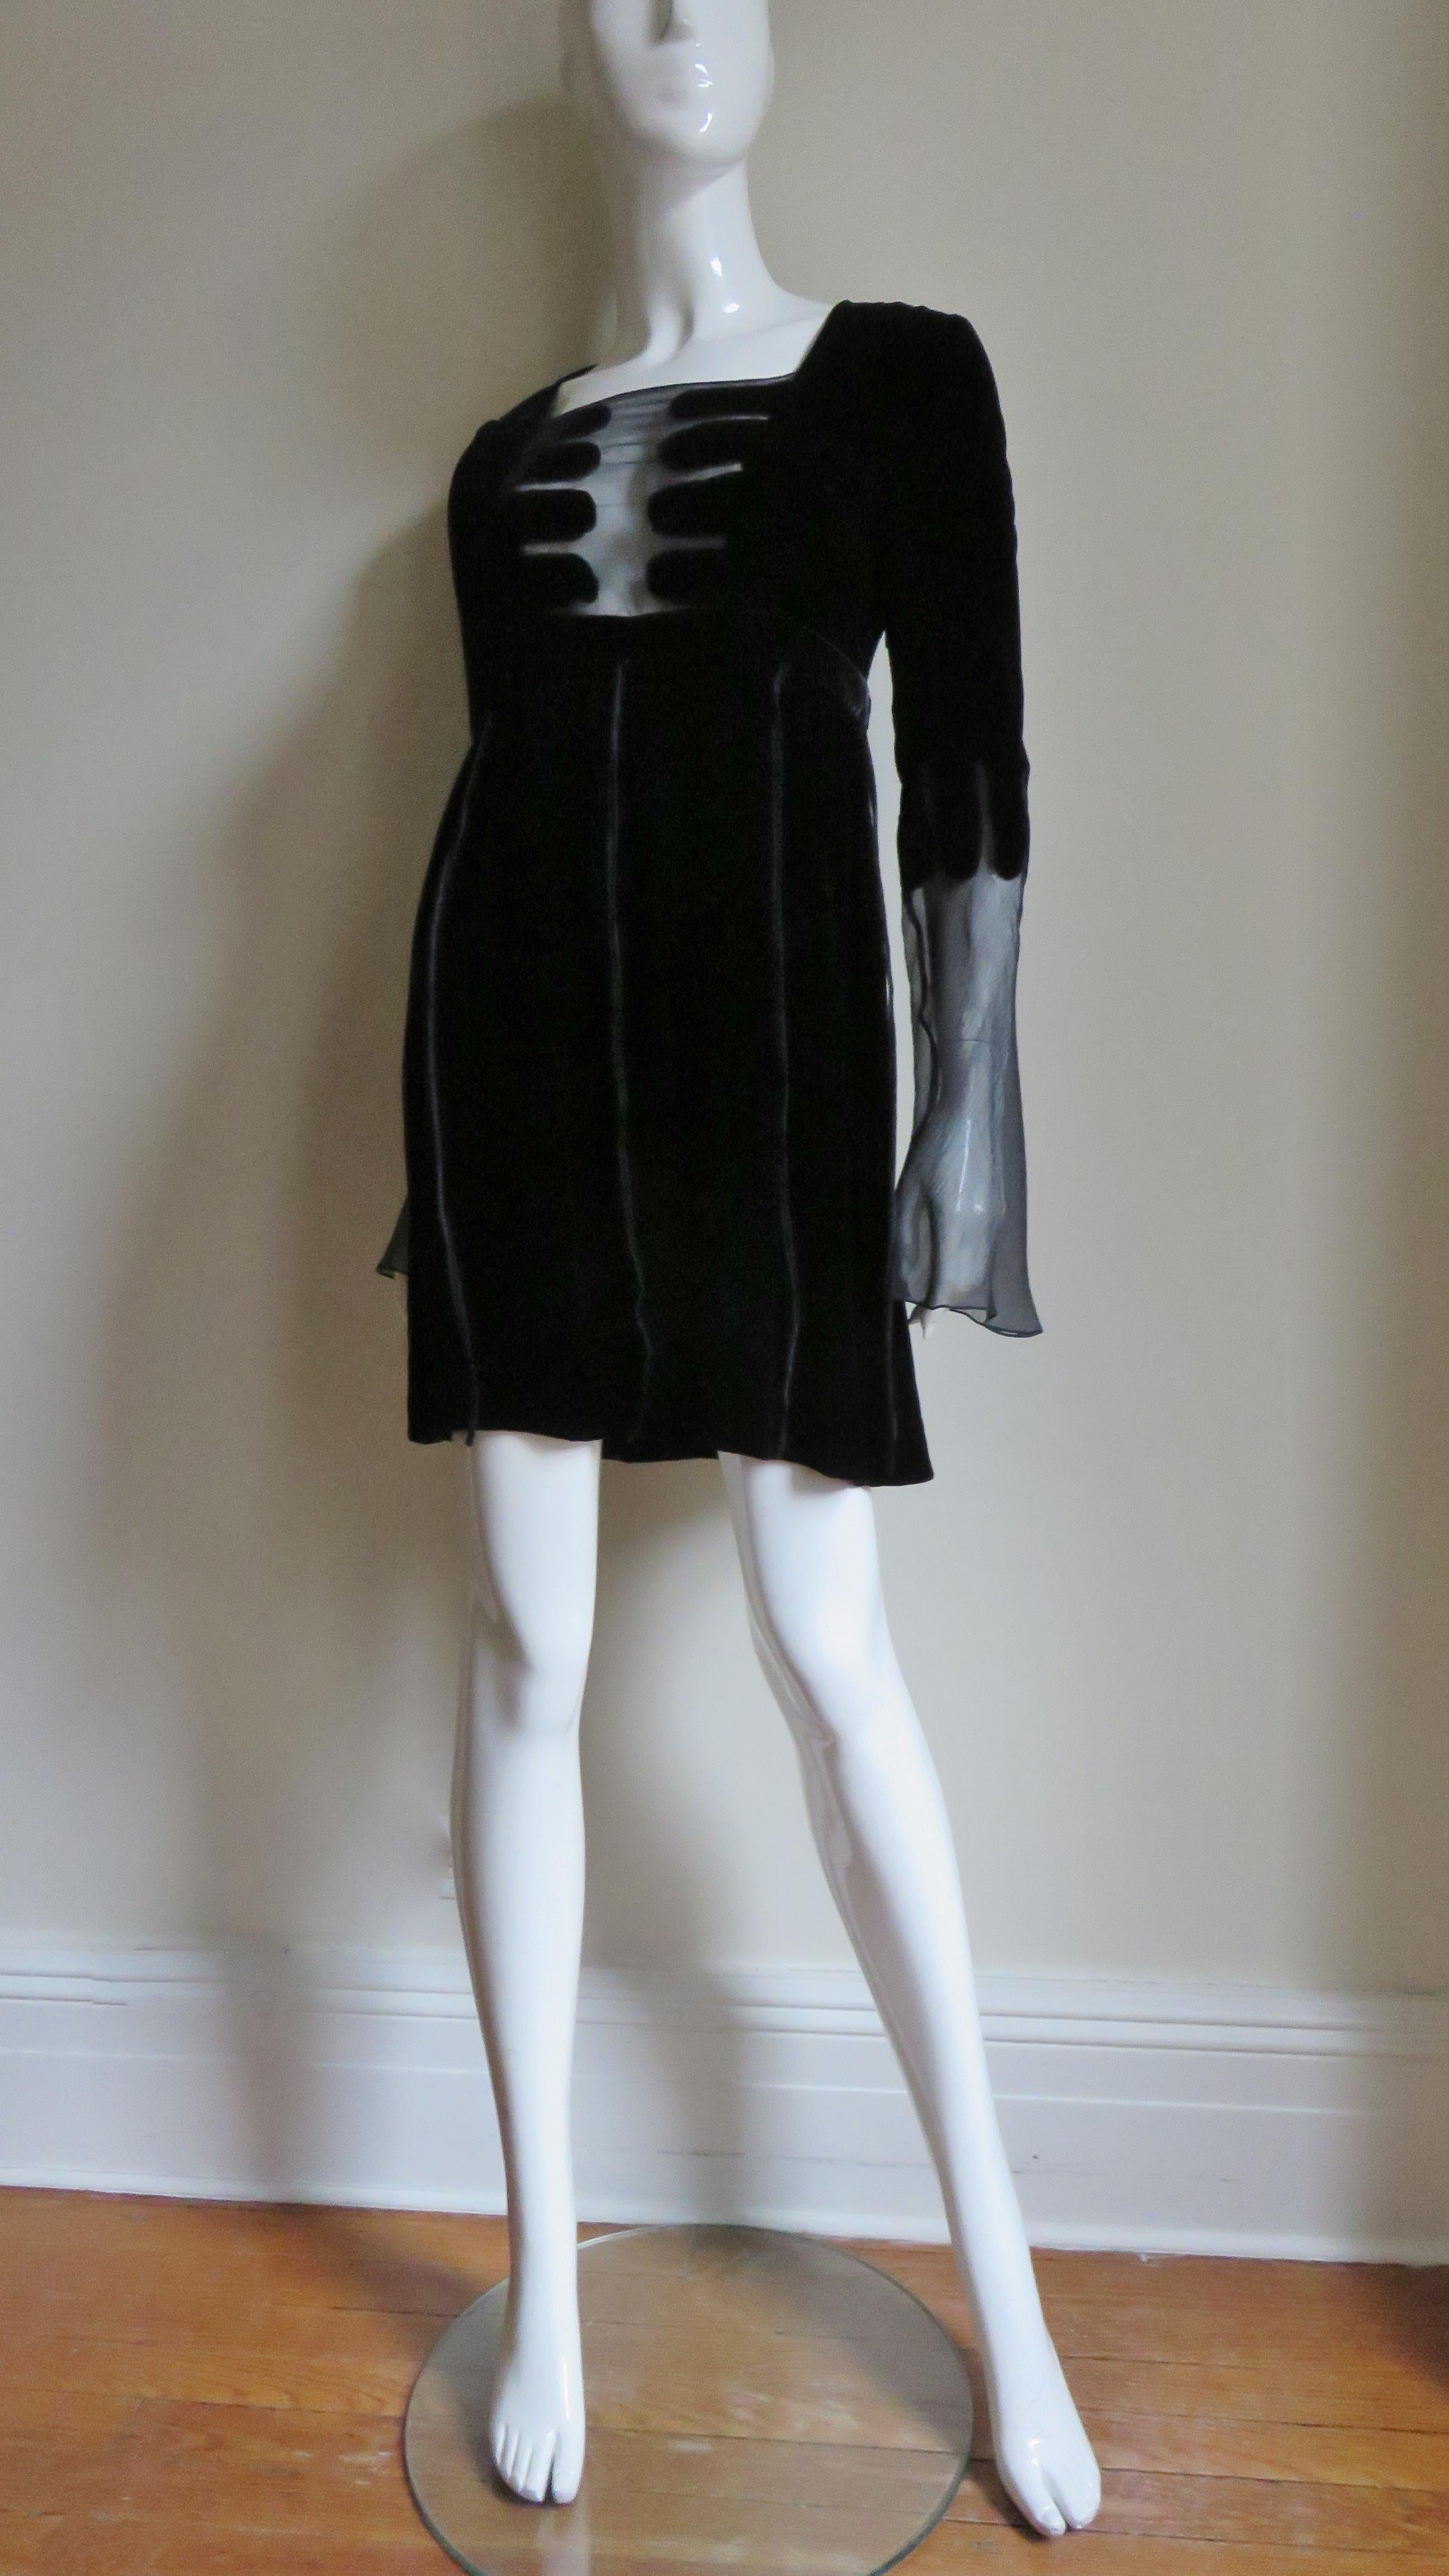 Tom Ford for Gucci New Silk Velvet Dress F/W 2001 In Excellent Condition For Sale In Water Mill, NY